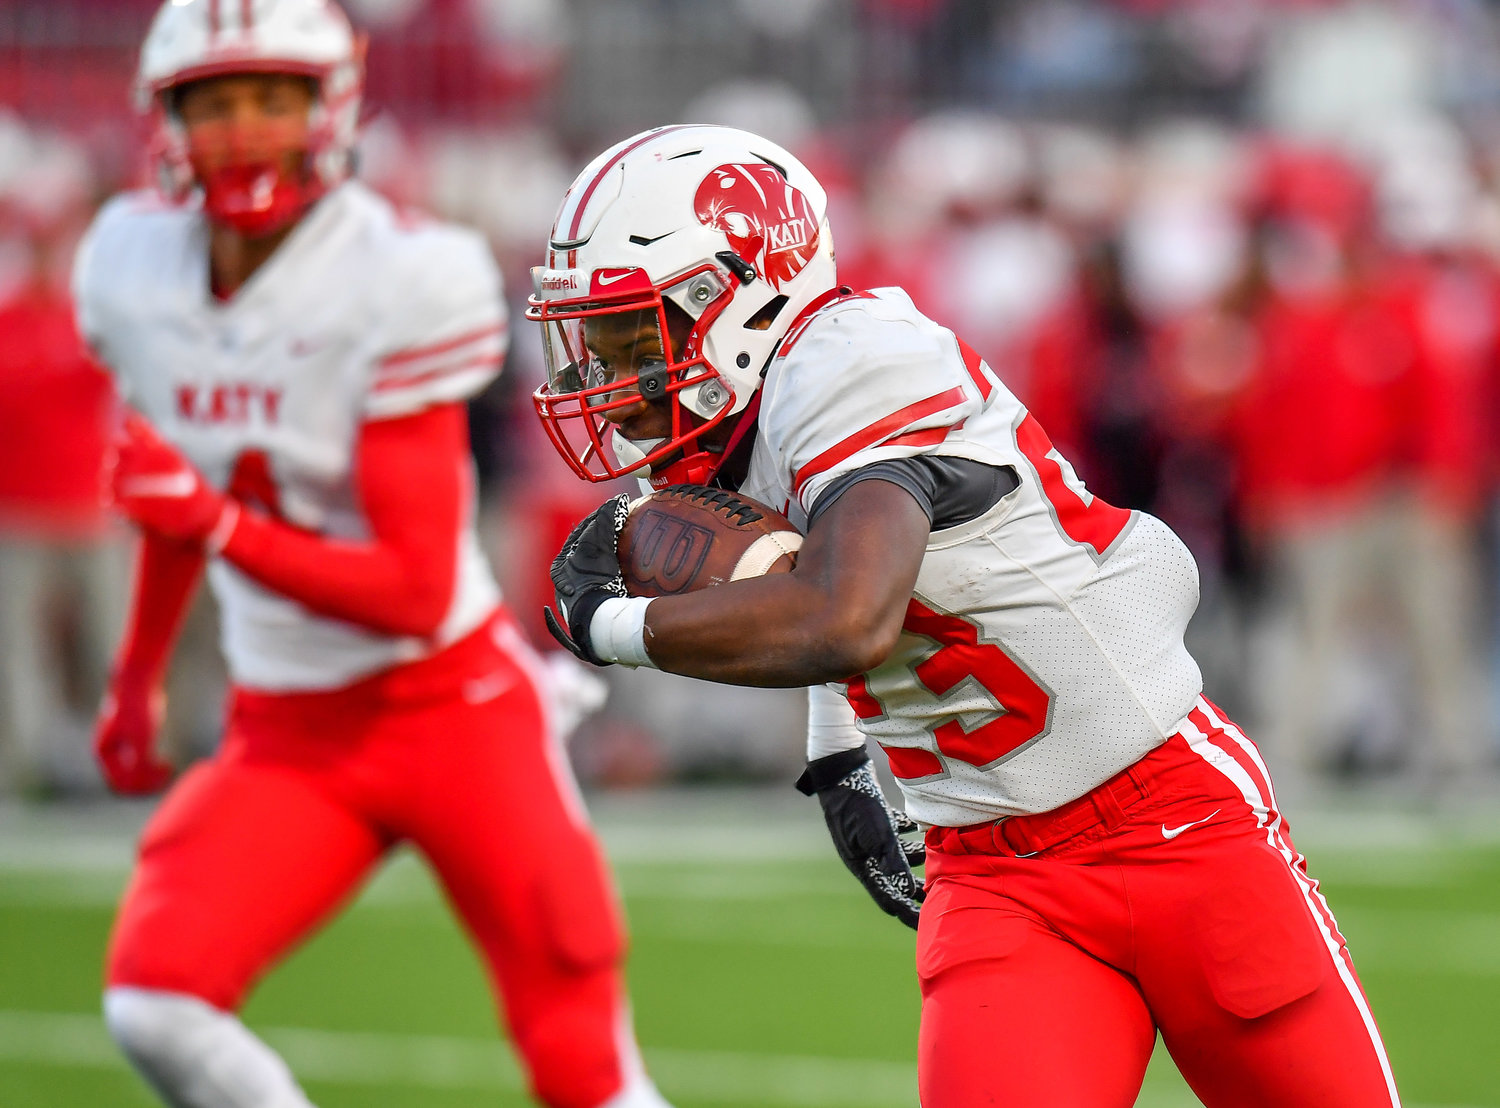 Katy, Tx. Nov 5, 2021: Katy's Seth Davis #23 rushes in for a TD during the first half of a conference game between Katy and Morton Ranch at Legacy in Katy. (Photo by Mark Goodman / Katy Times)